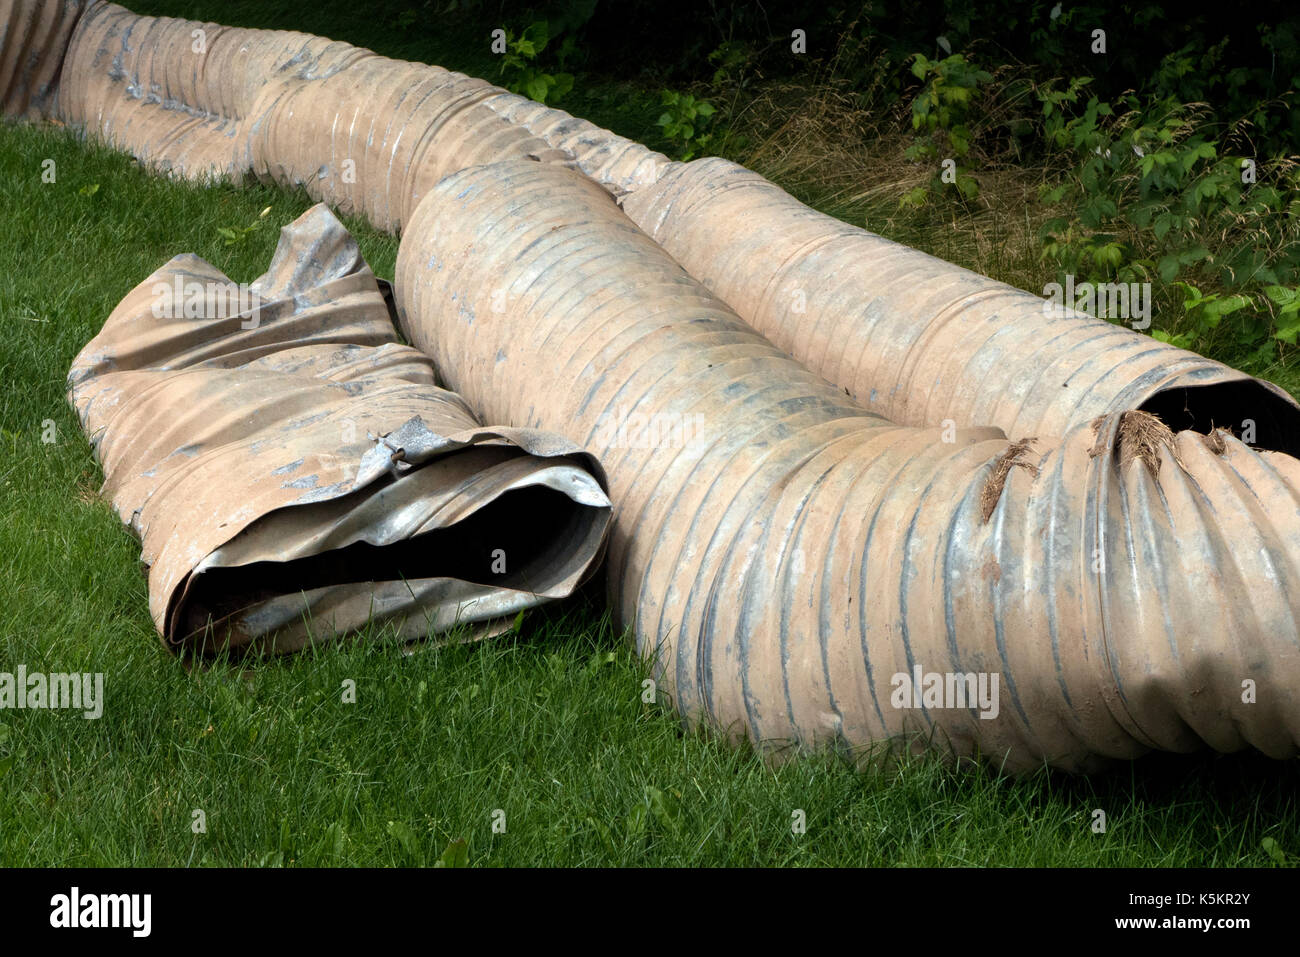 Construction site, flexible piping junked. Stock Photo